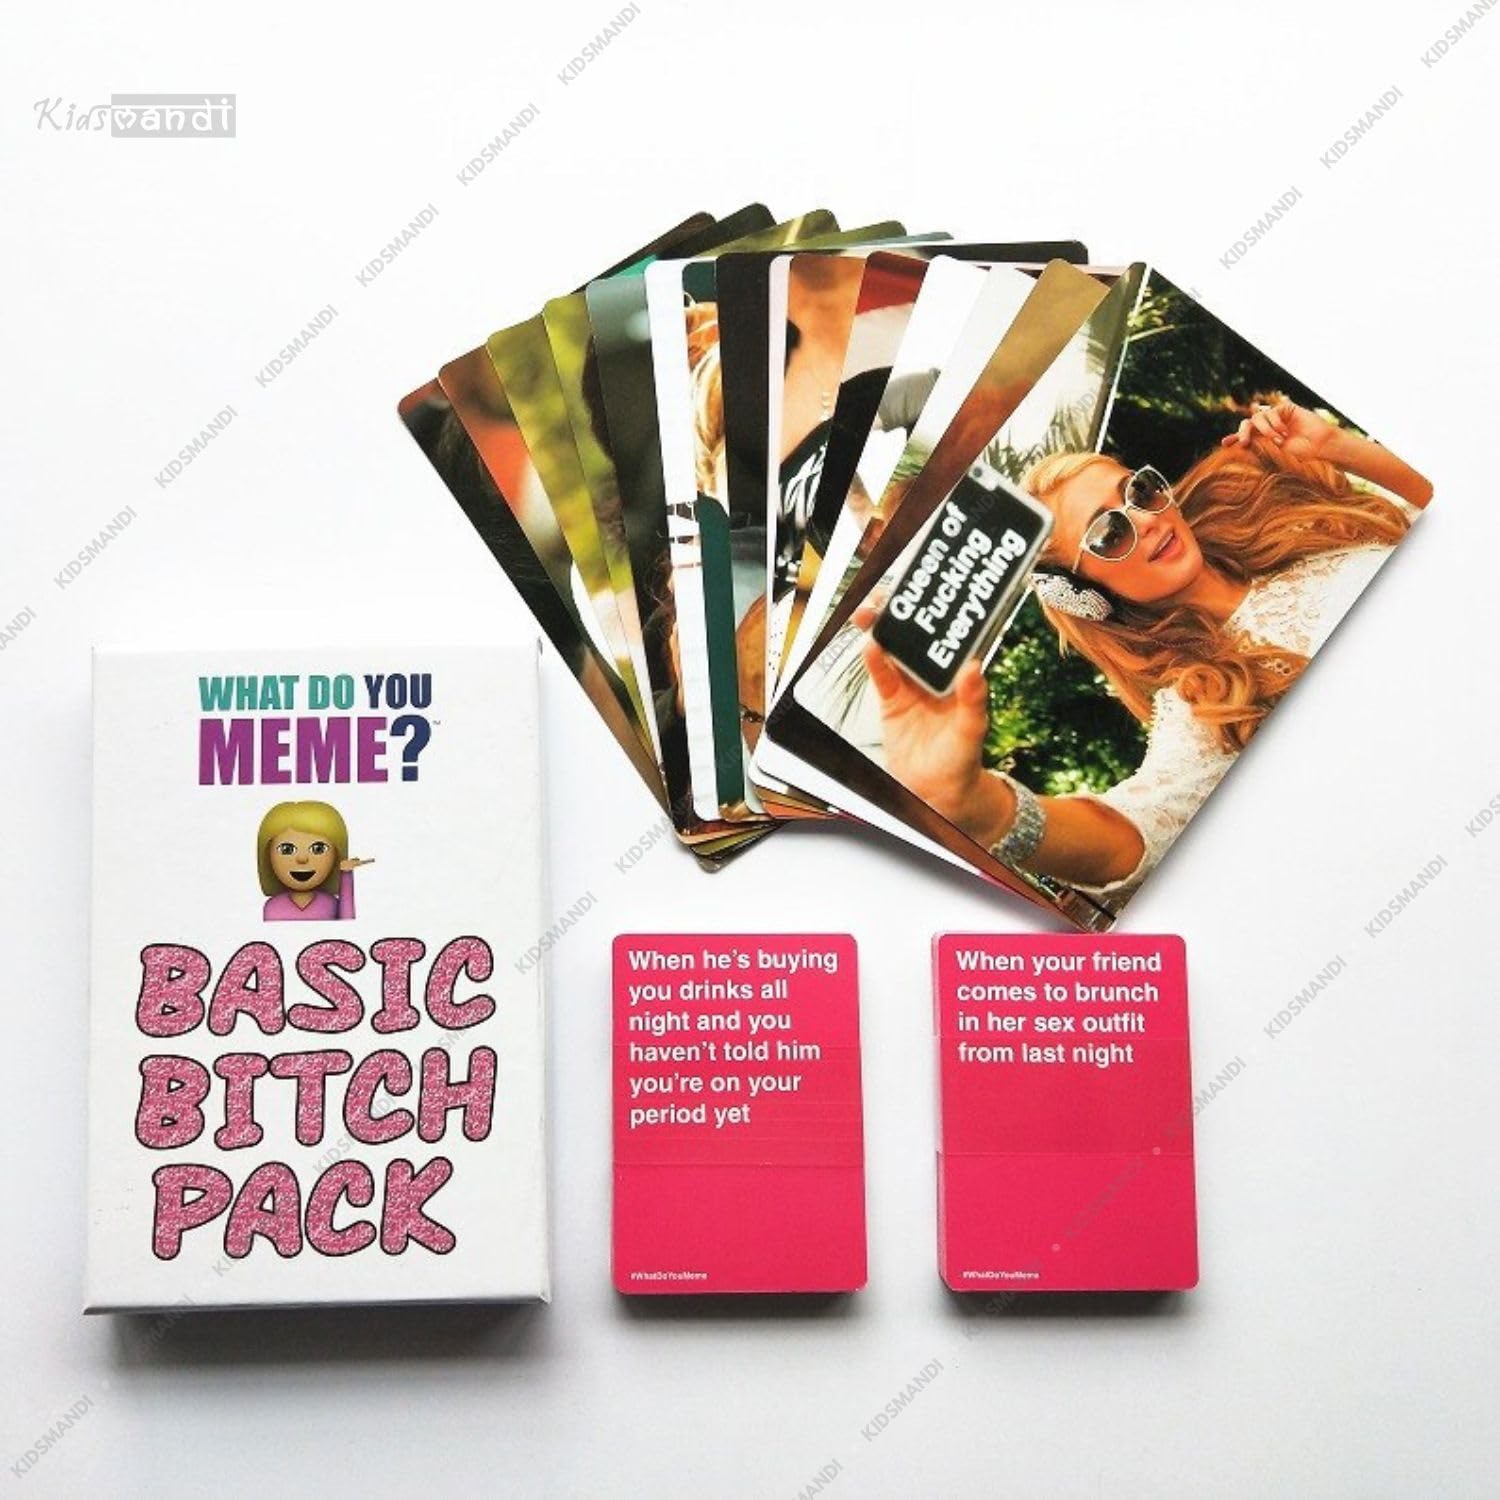 Kids Mandi What Do You Meme Party Game - Fun and interactive!